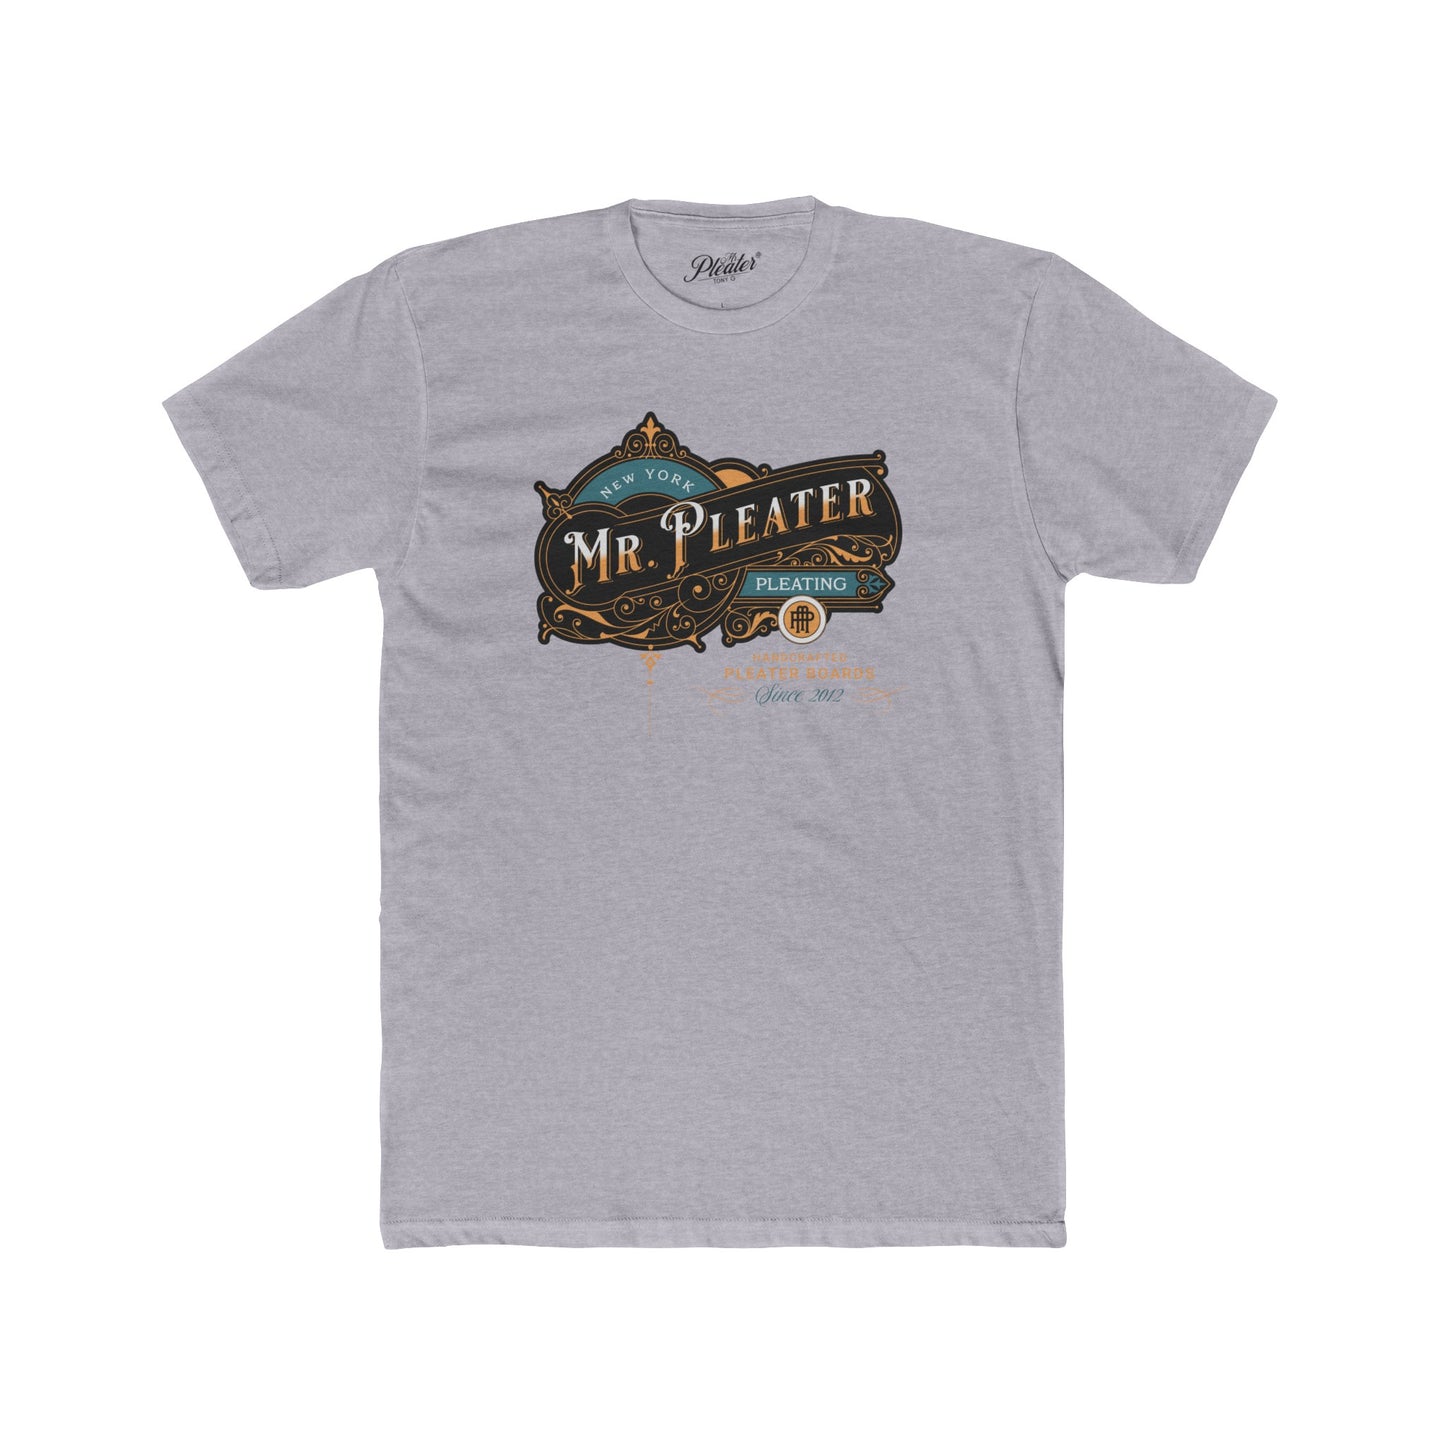 Mr. Pleater By TONY G Men's Cotton Crew Tee, featuring the Mr. Pleater Handcrafted Pleater Board 2 design